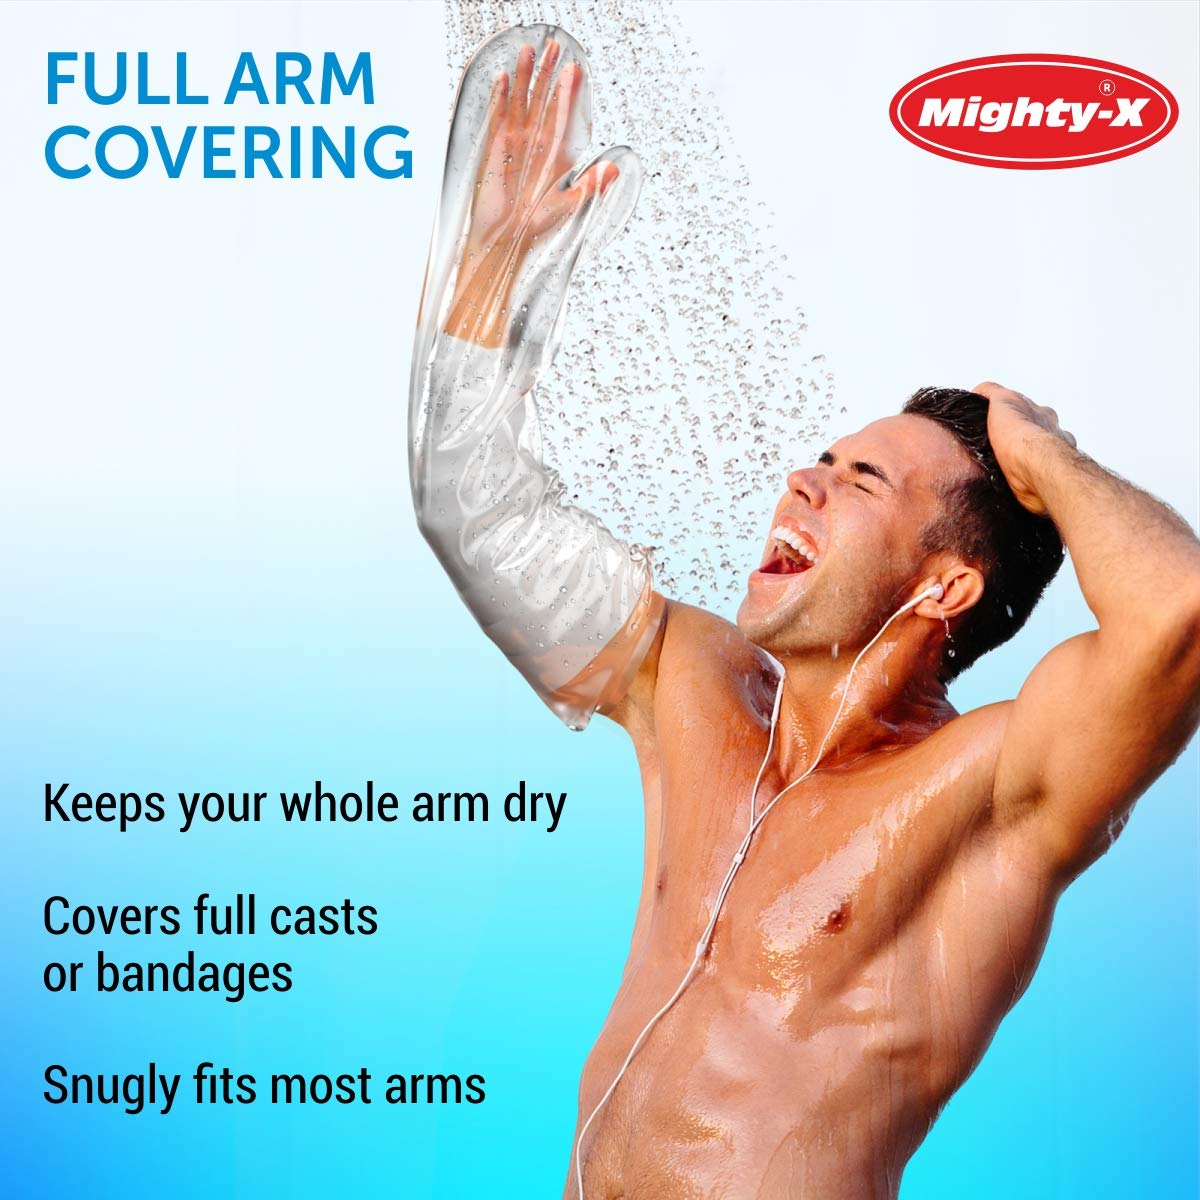 100% Waterproof Cast Cover Arm - [Tight Seal] - 2pk Reusable Full Size Adult Cast Covers for Shower Arm